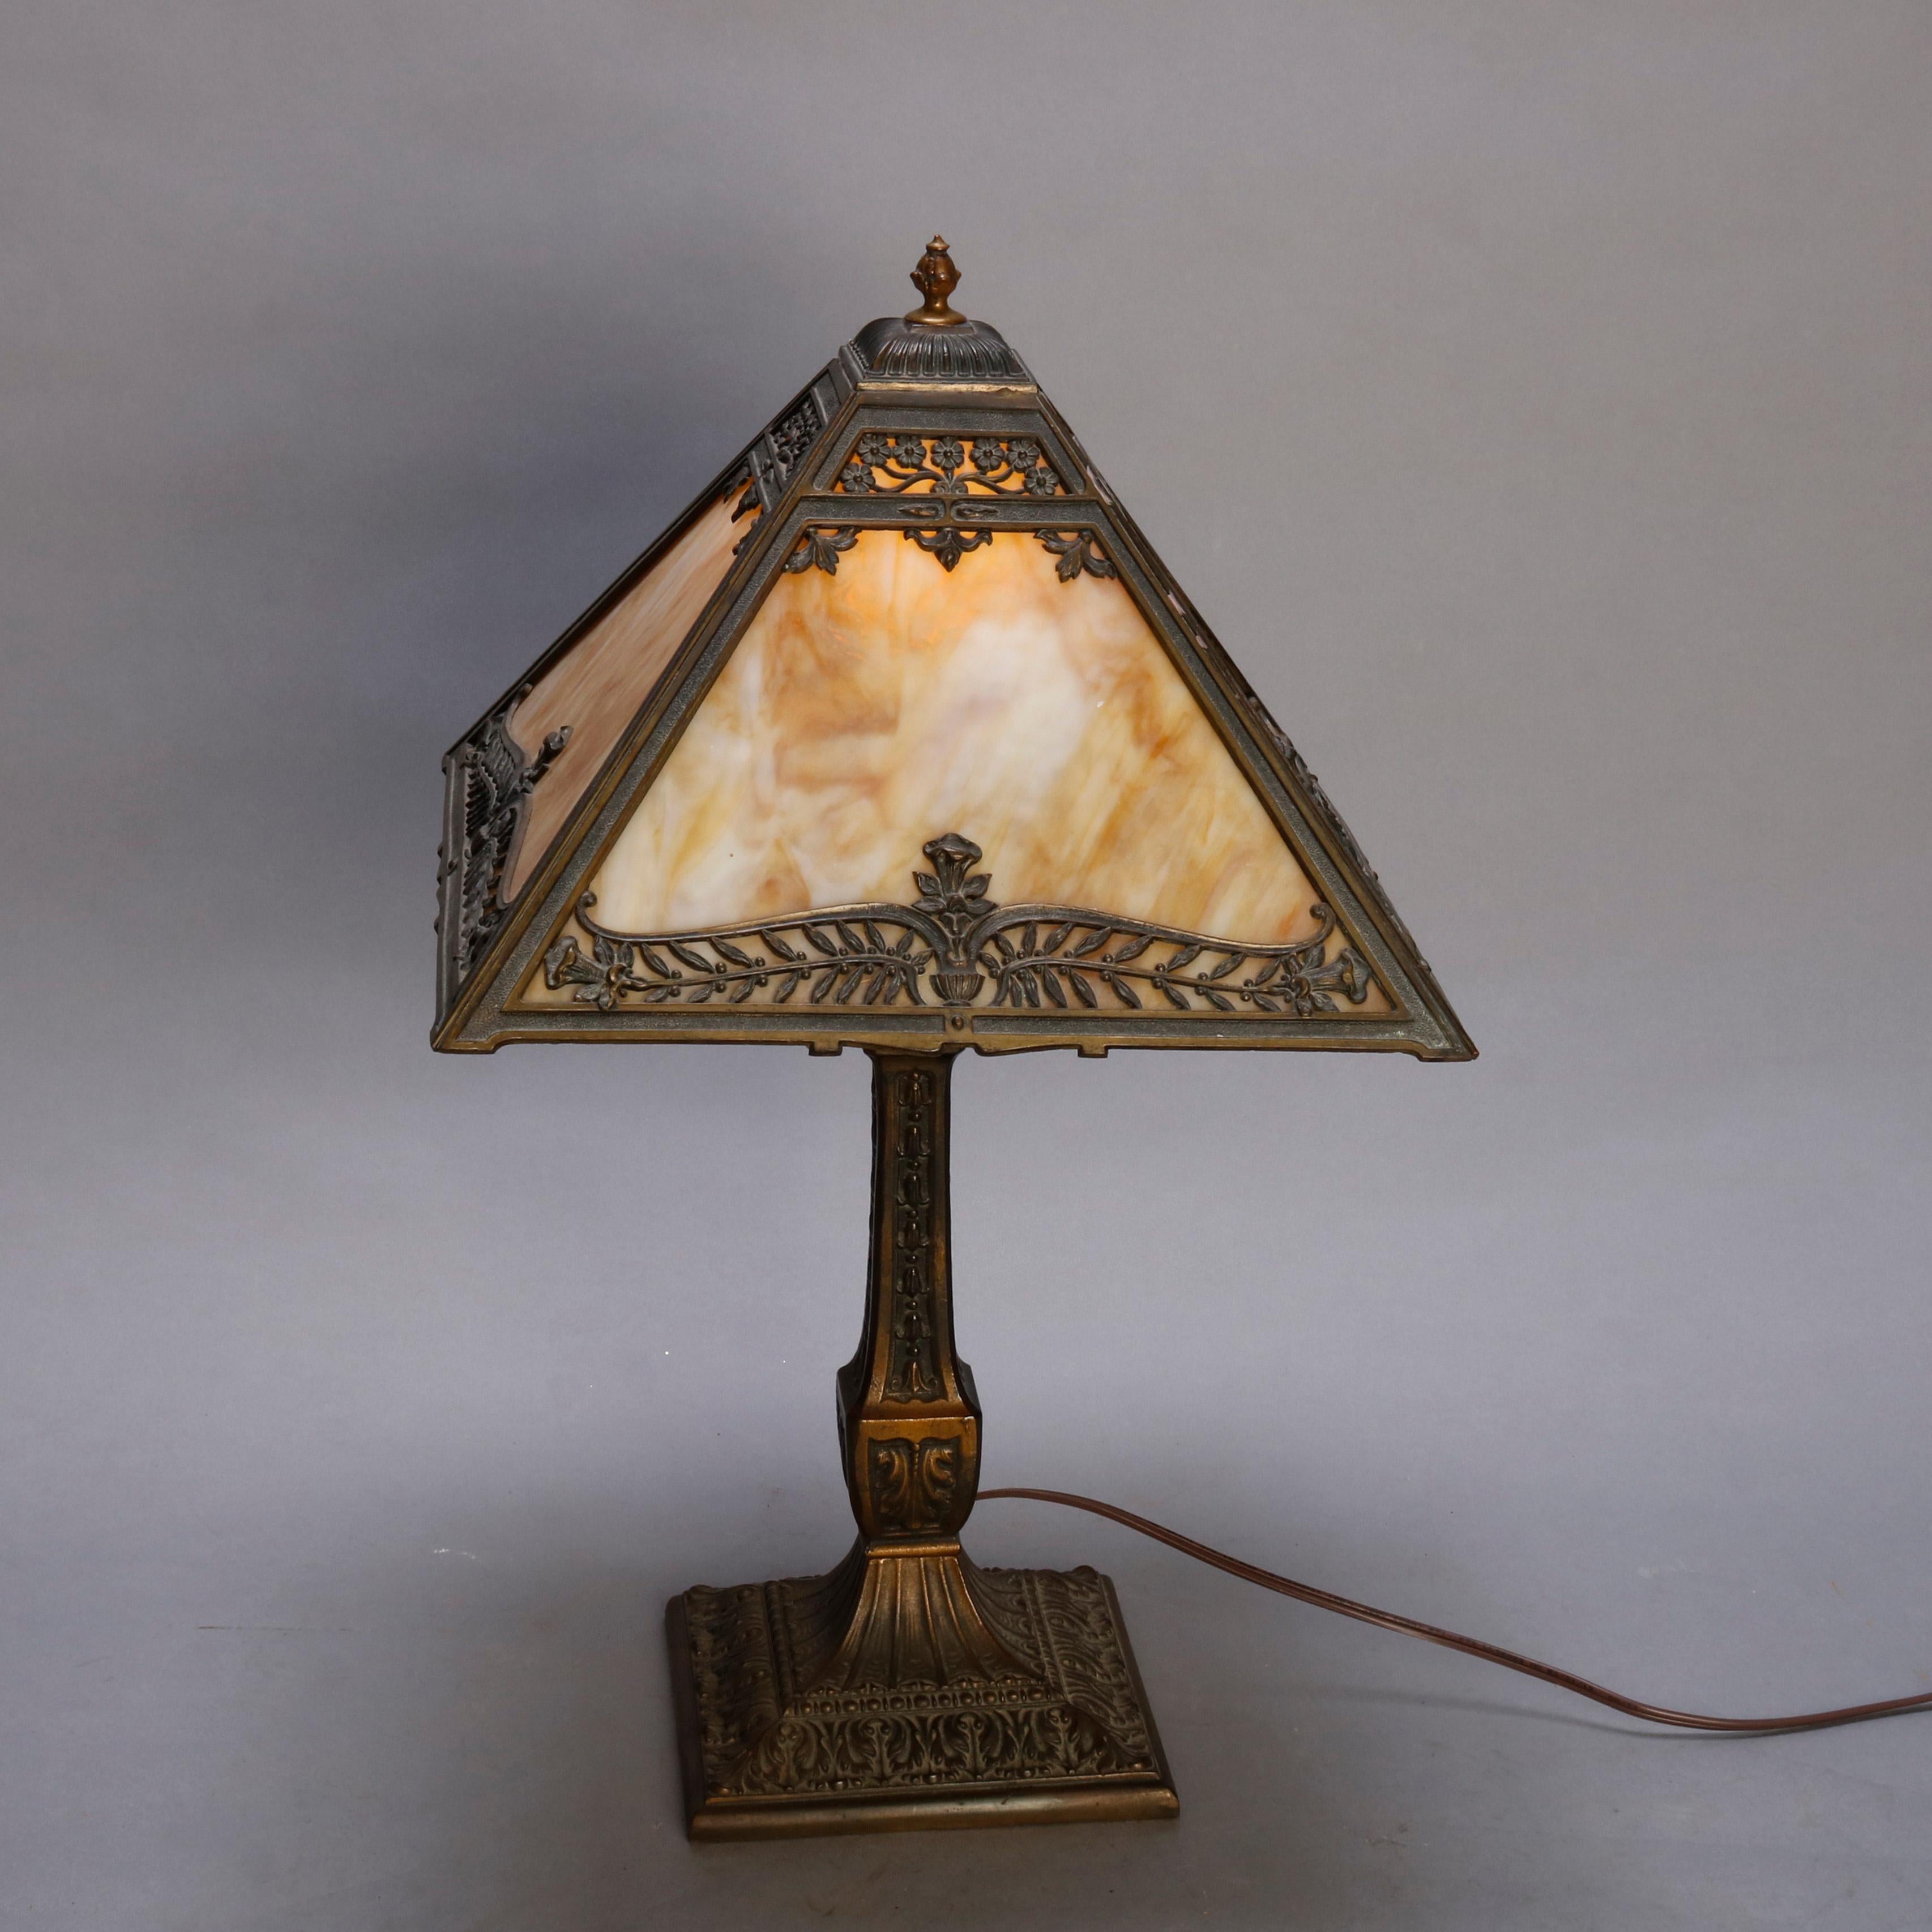 An antique Arts & Crafts table lamp by Pittsburgh Lamp Co. offers foliate cast filigree shade housing slag glass panels surmounting cast single socket base, signed PL&B, circa 1920.

Measures: 20.5